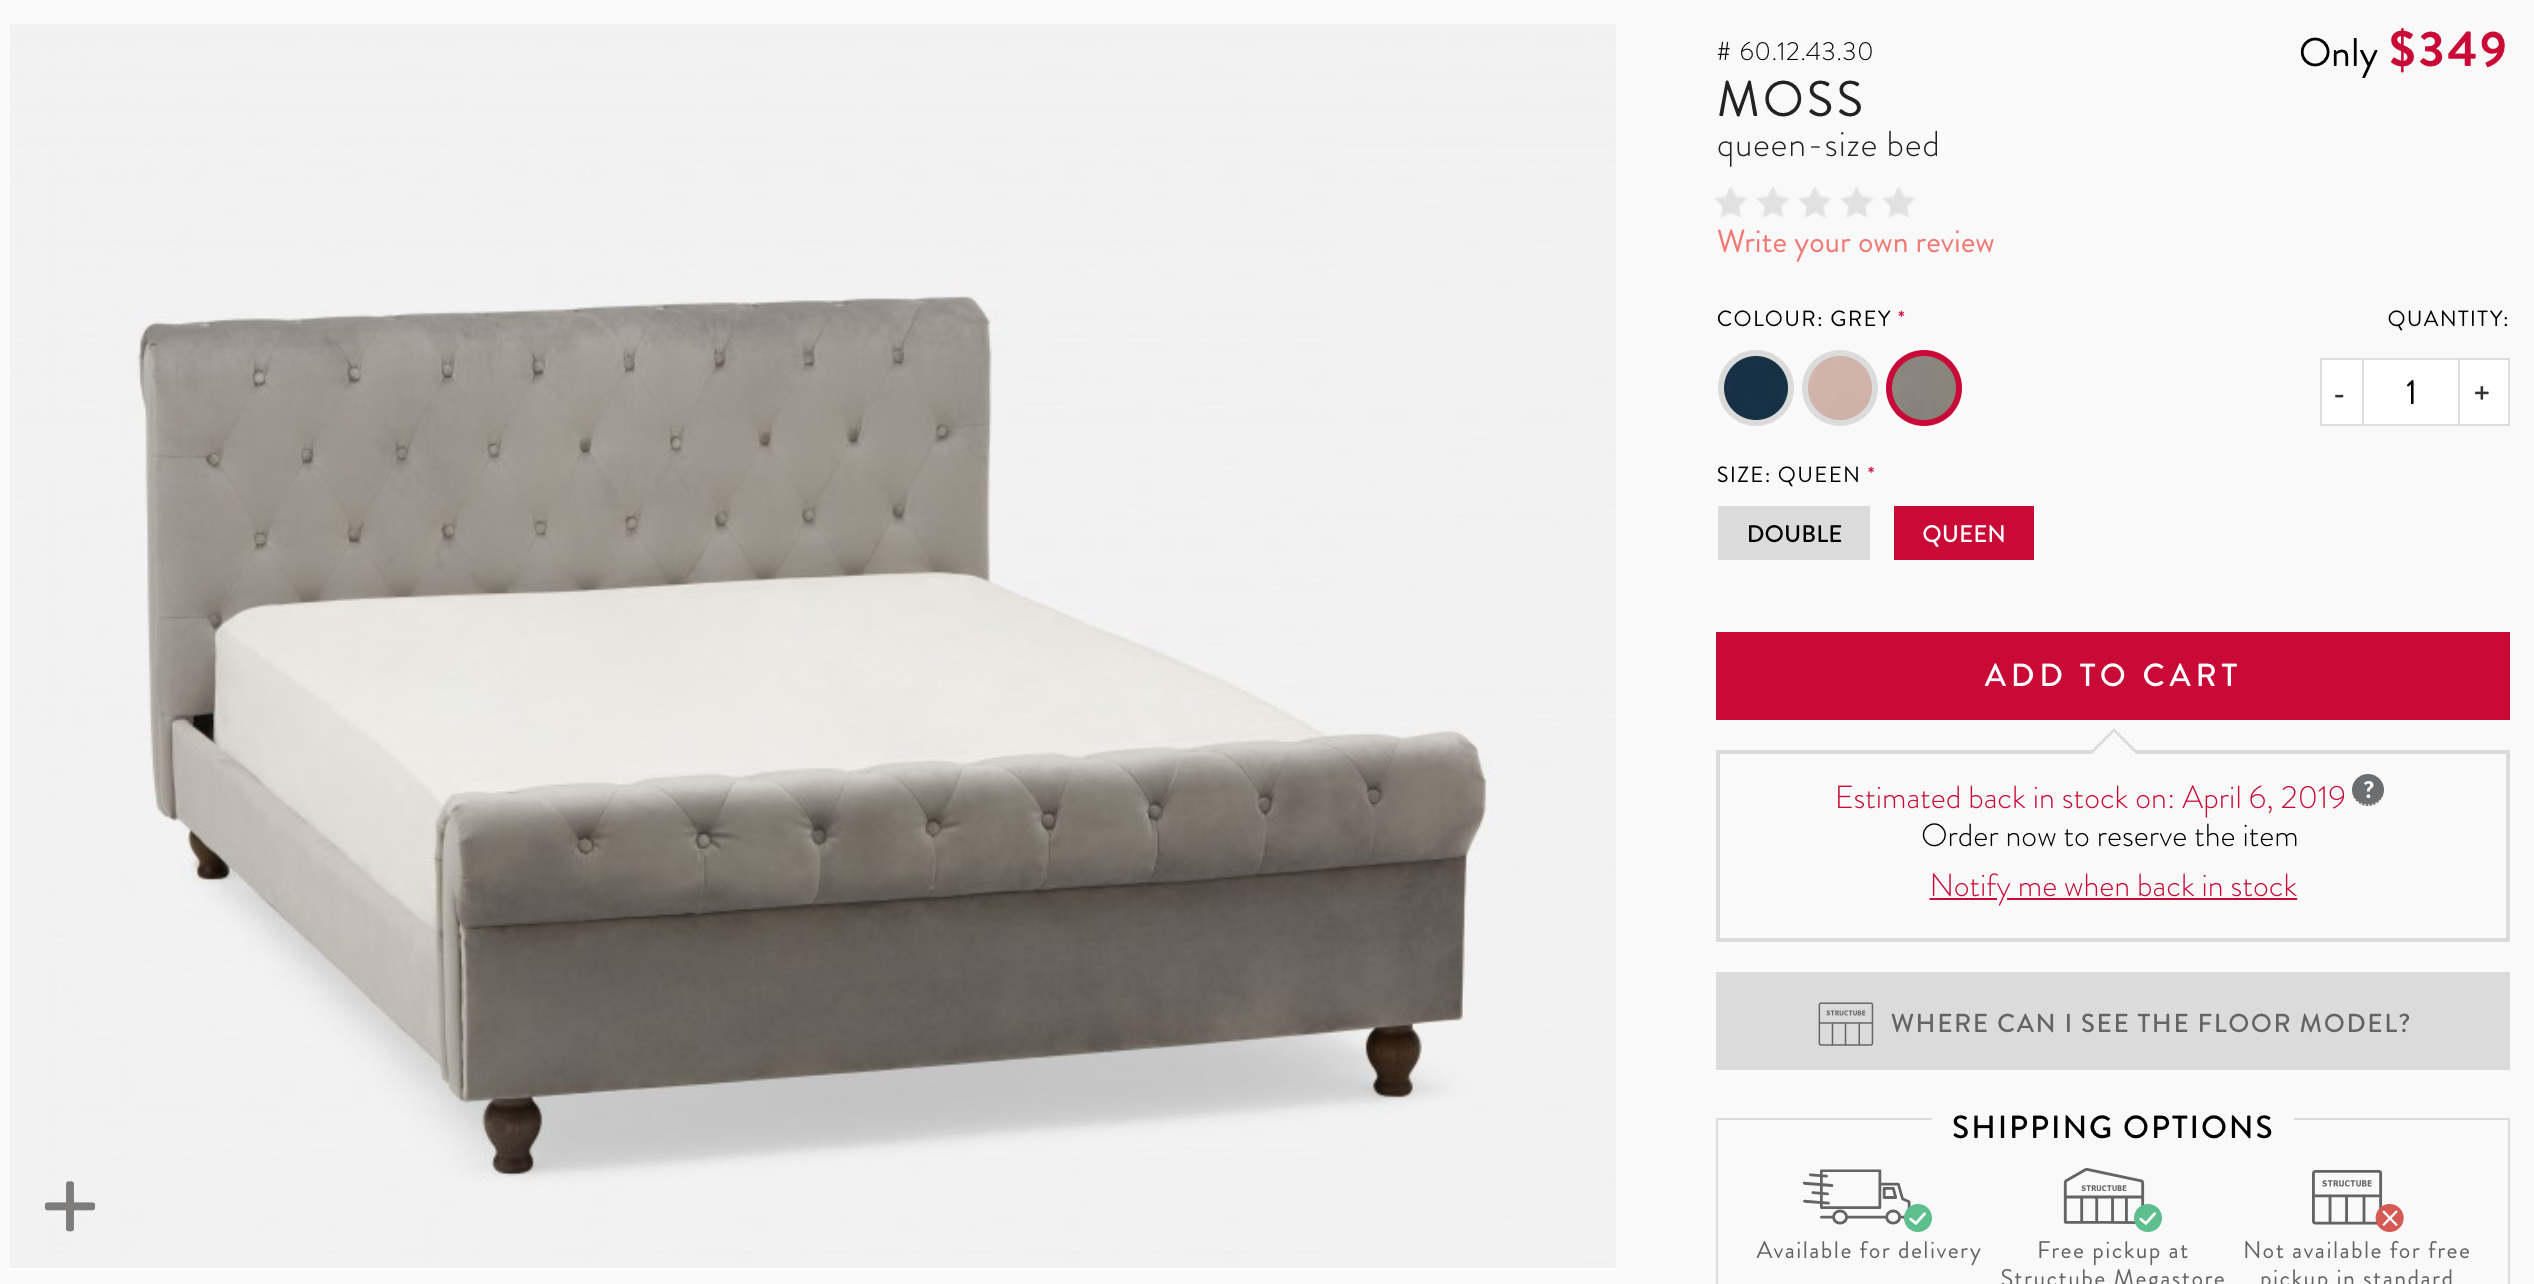 Moss bed from Structube, price $349